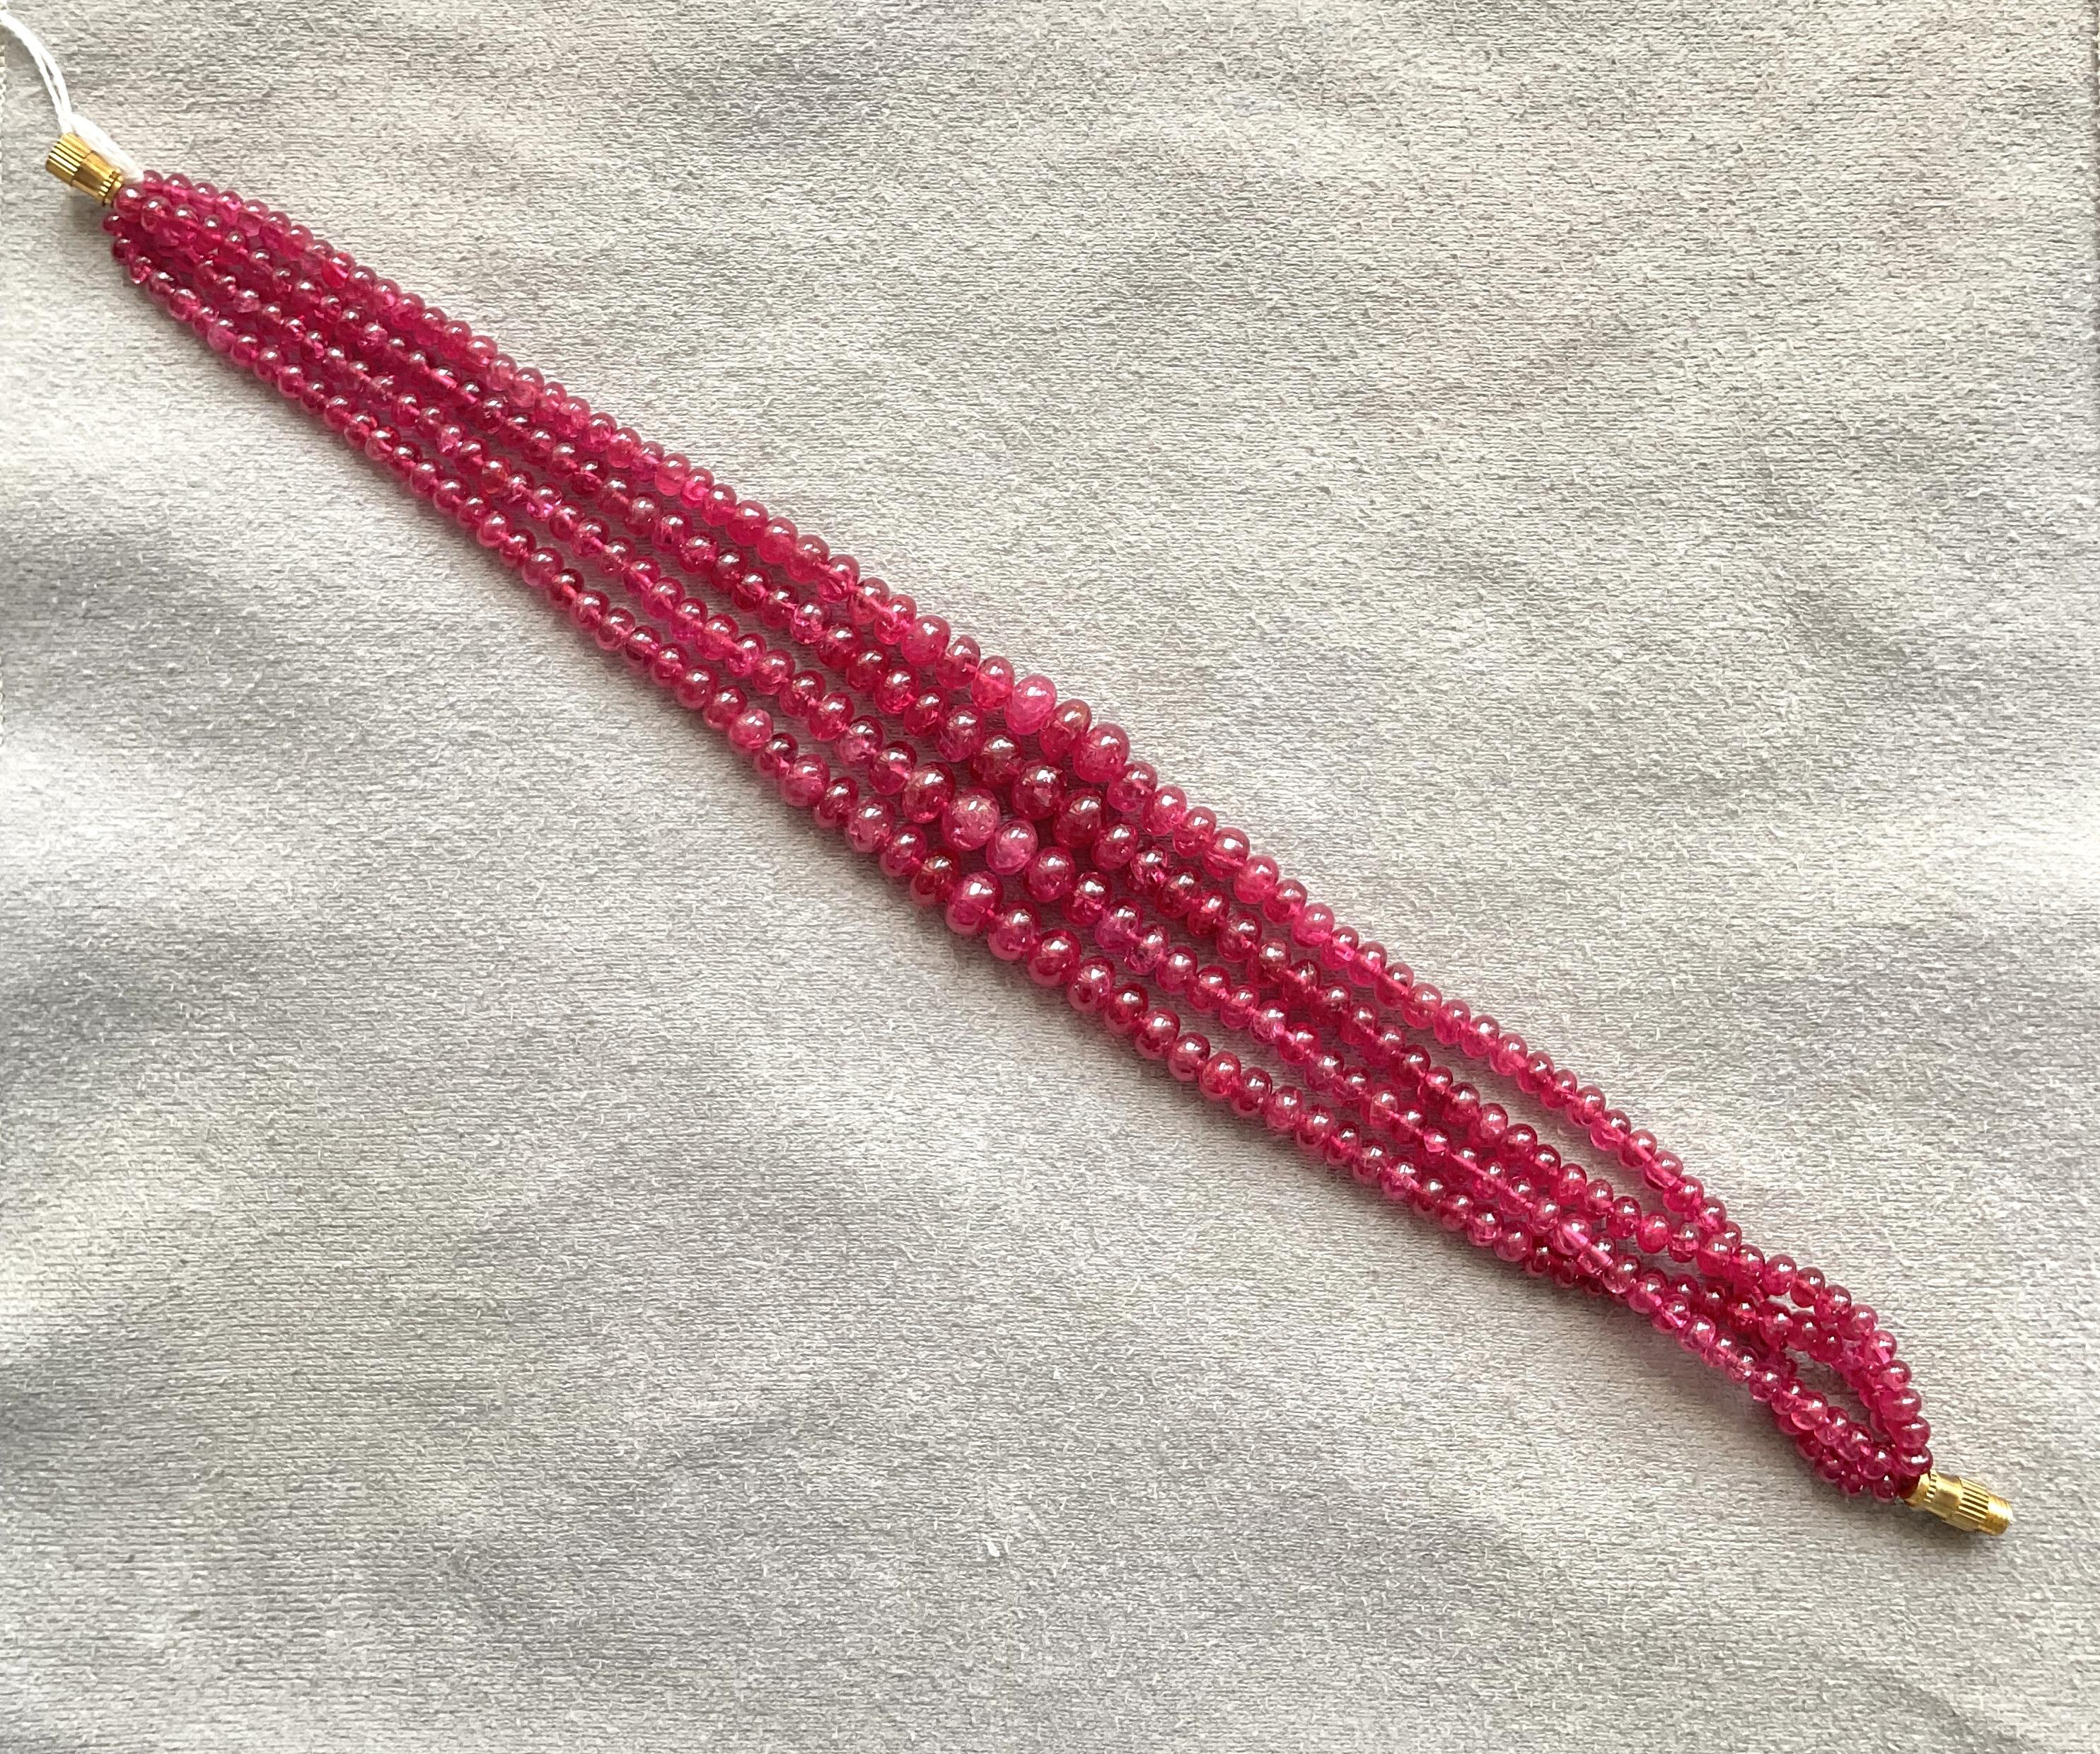 165.75 Carats Burma Red Spinel Beads Top Quality Beaded Necklace Natural Gem

Gemstone - Spinel
Weight - 165.75 carats
Shape - Beads
Size - 3.5 To 6.5 MM
Quantity - 4 Line